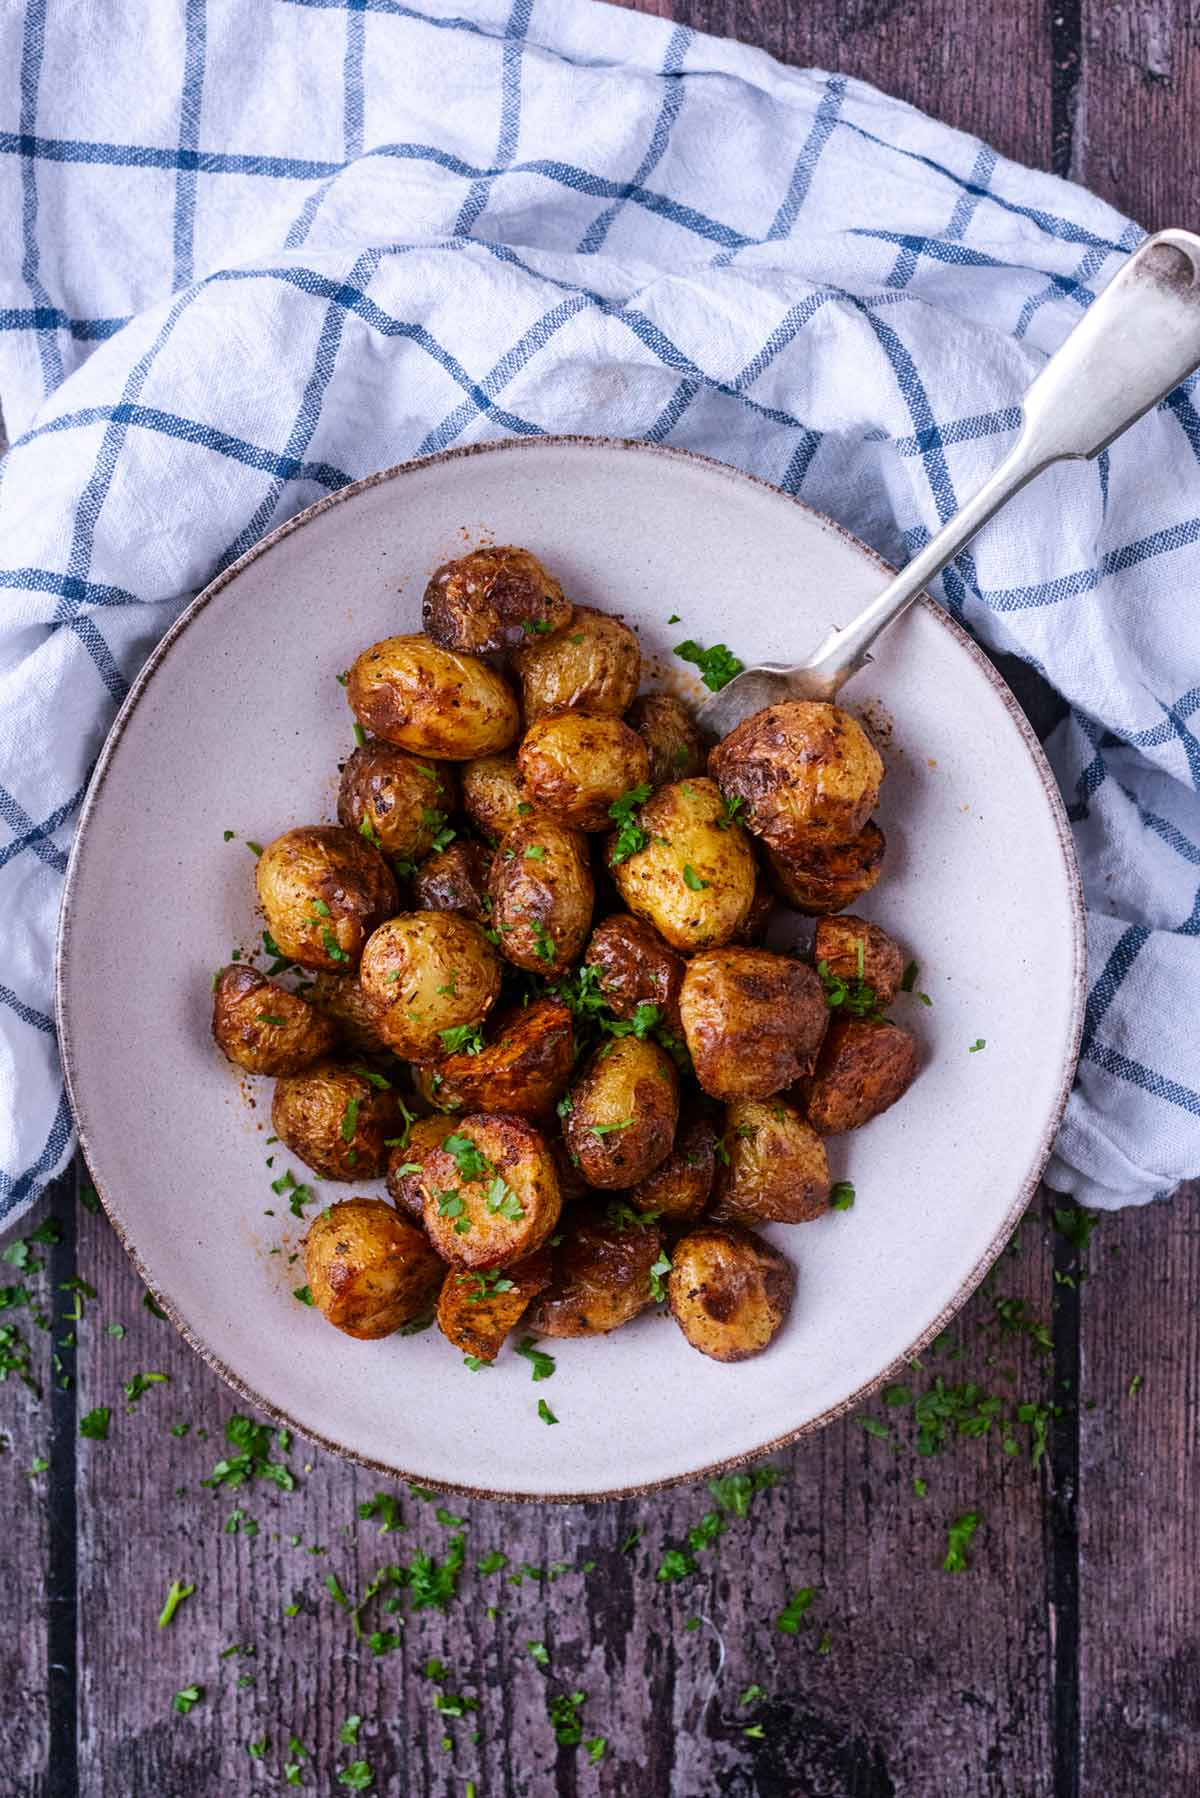 A plate of cooked baby potatoes in front of a checked towel.